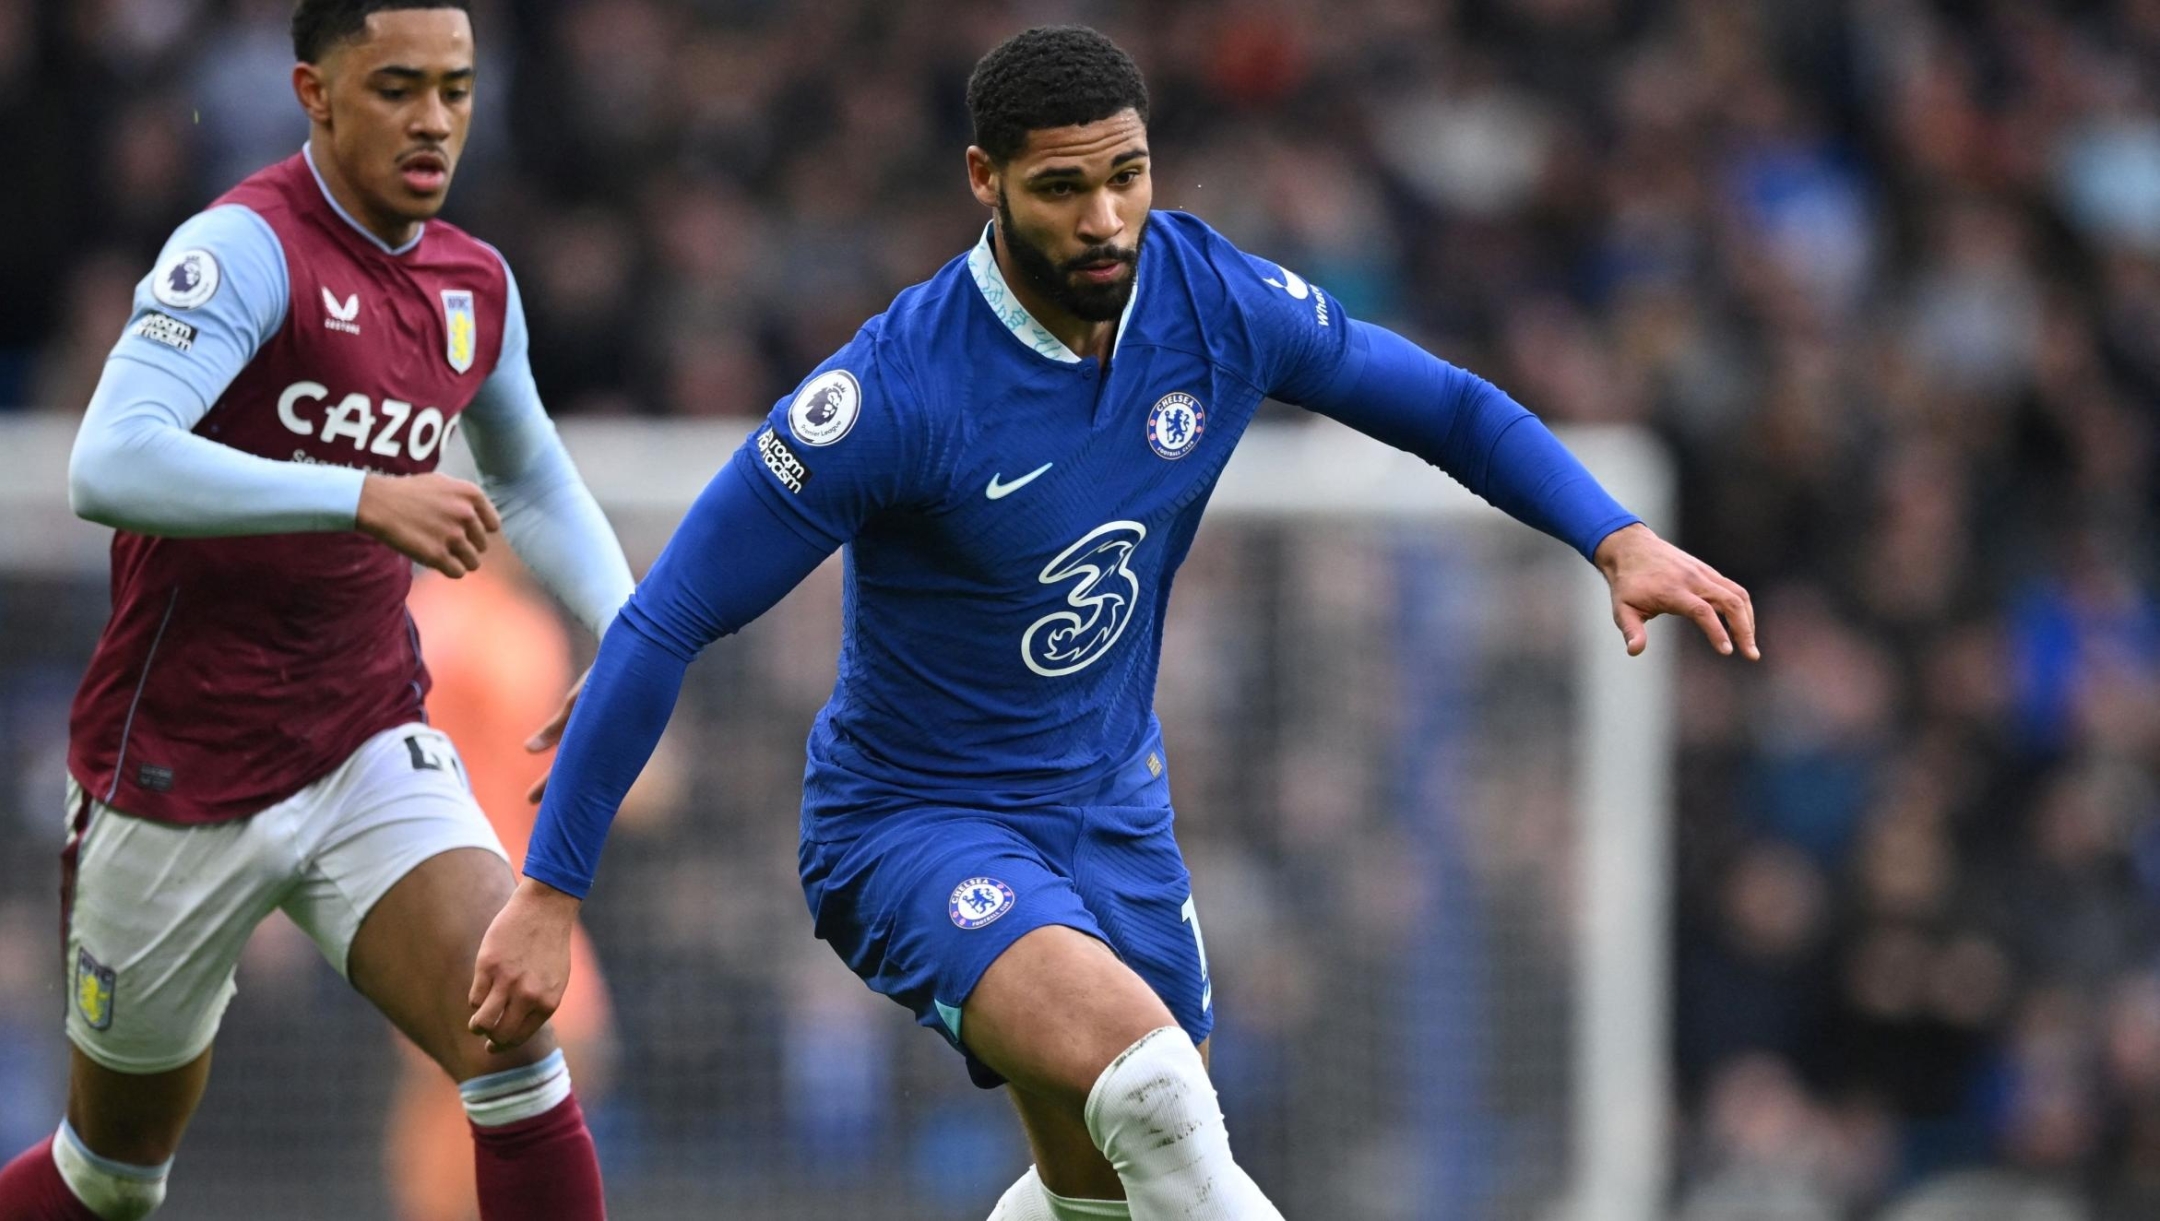 Chelsea's English midfielder Ruben Loftus-Cheek (R) controls the ball during the English Premier League football match between Chelsea and Aston Villa at Stamford Bridge in London on April 1, 2023. (Photo by JUSTIN TALLIS / AFP) / RESTRICTED TO EDITORIAL USE. No use with unauthorized audio, video, data, fixture lists, club/league logos or 'live' services. Online in-match use limited to 120 images. An additional 40 images may be used in extra time. No video emulation. Social media in-match use limited to 120 images. An additional 40 images may be used in extra time. No use in betting publications, games or single club/league/player publications. /